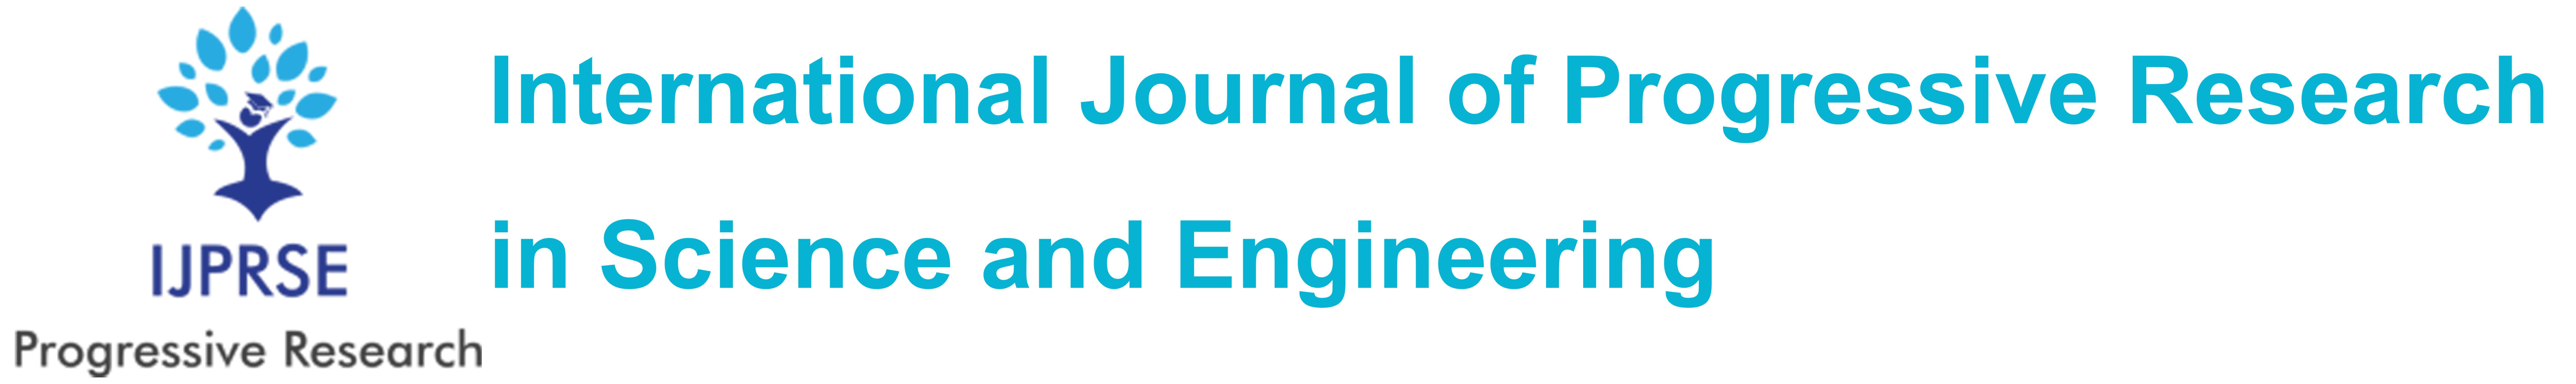 International Journal of Progressive Research in Science and Engineering